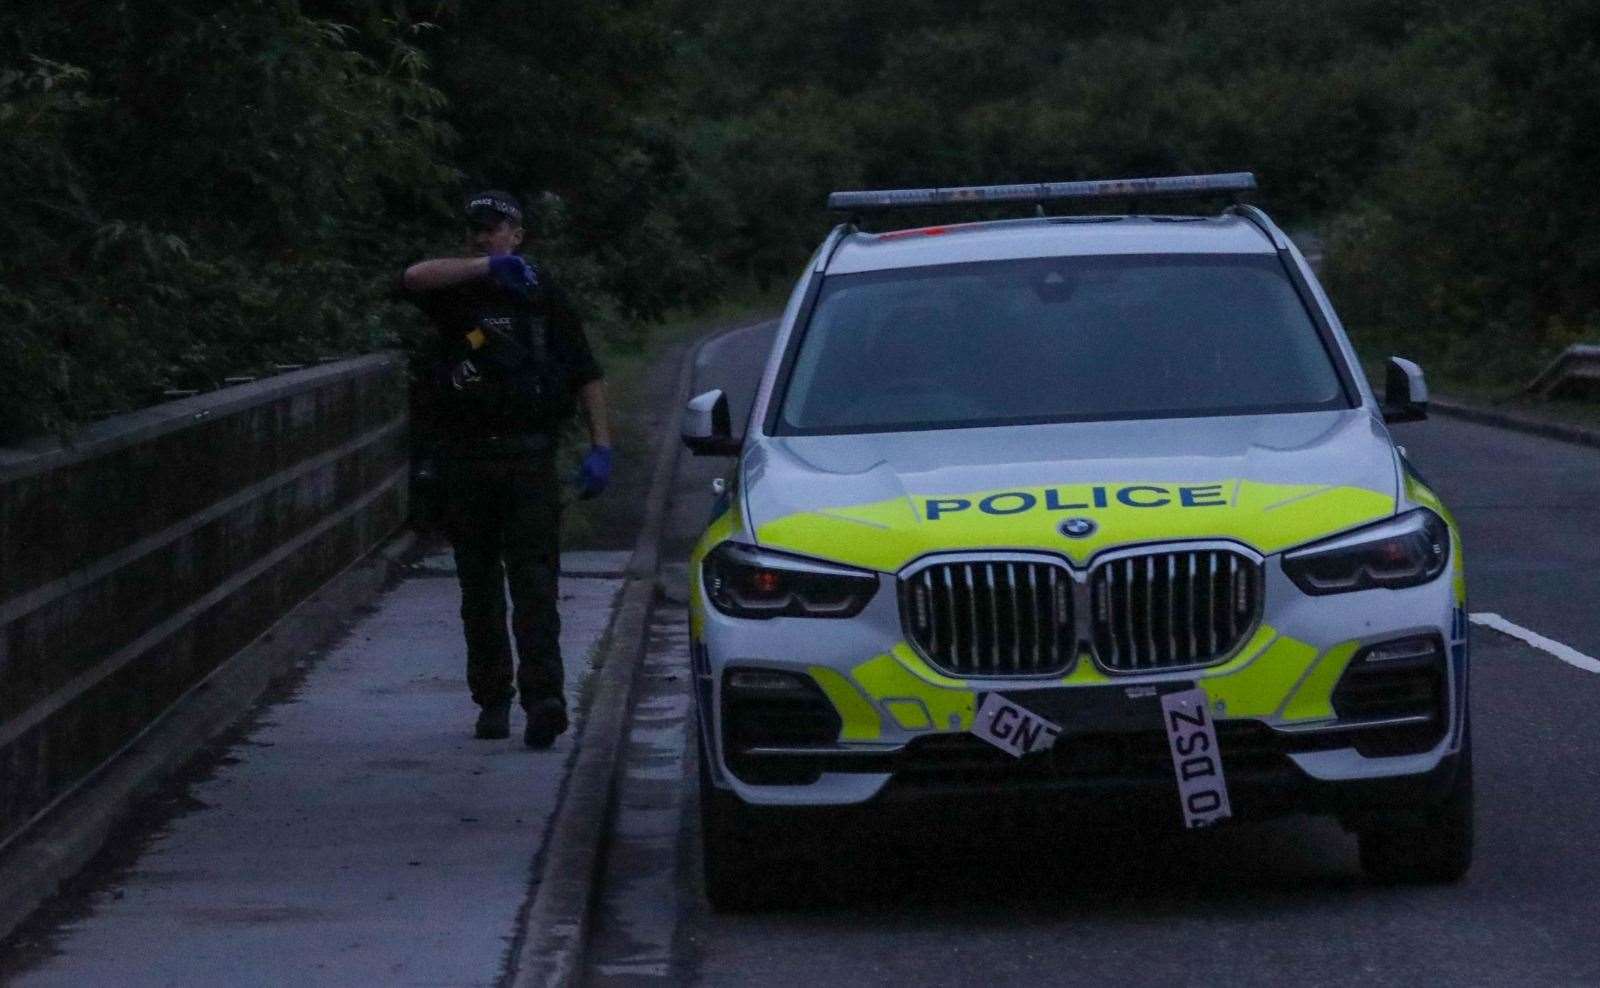 Police were also seen at Chattenden near the Four Elms roundabout in the early hours searching woodland with sniffer dog teams. A police BMW X5 was damaged. Picture: UKNIP